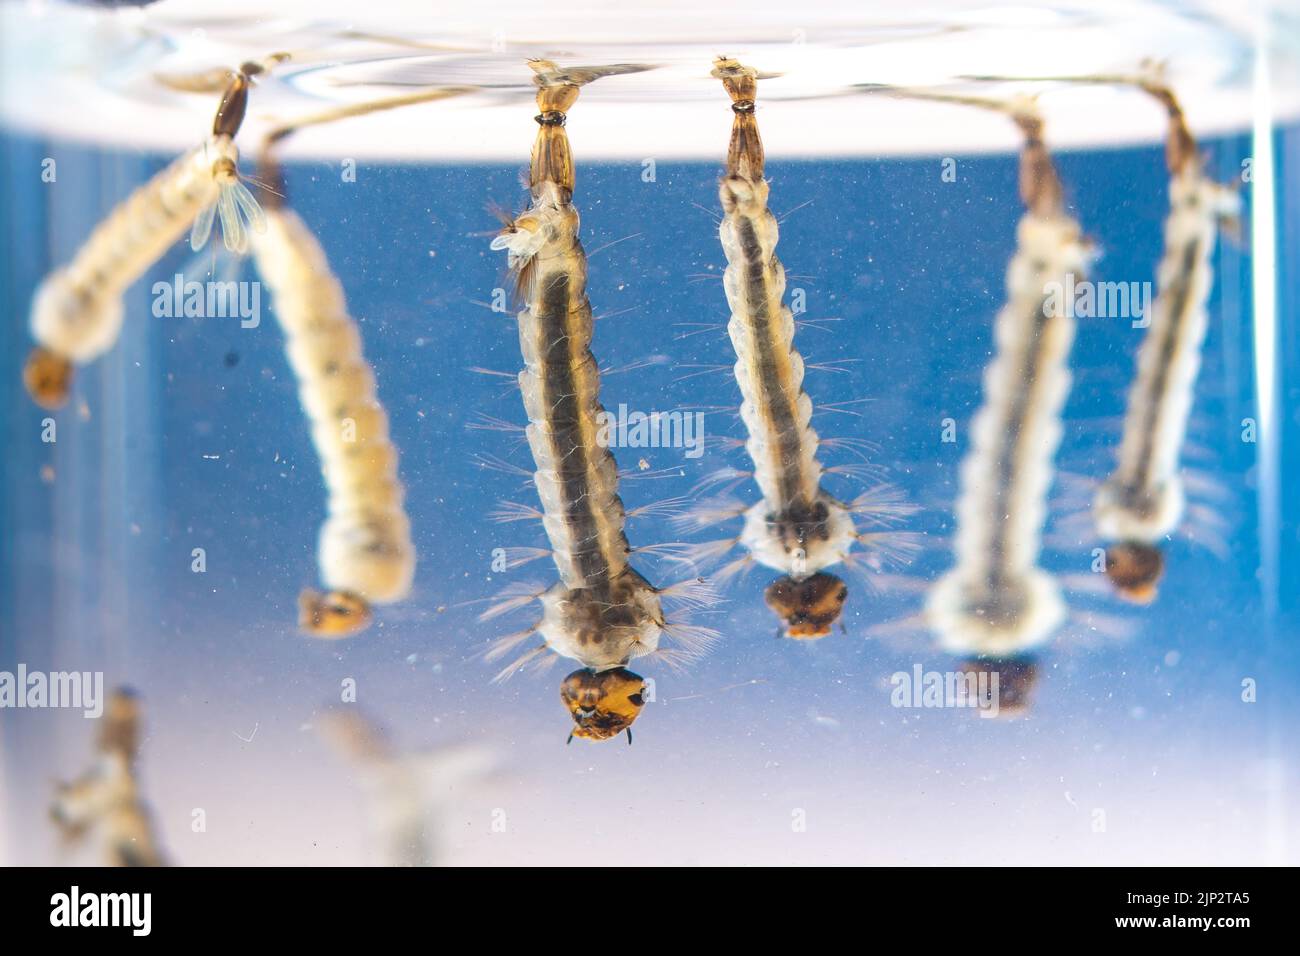 Asian tiger mosquito larvae in water alive, Aedes albopictus. Exotic species, invasive mosquito. Aedes. Macrophotography, close-up. Larval stages Stock Photo